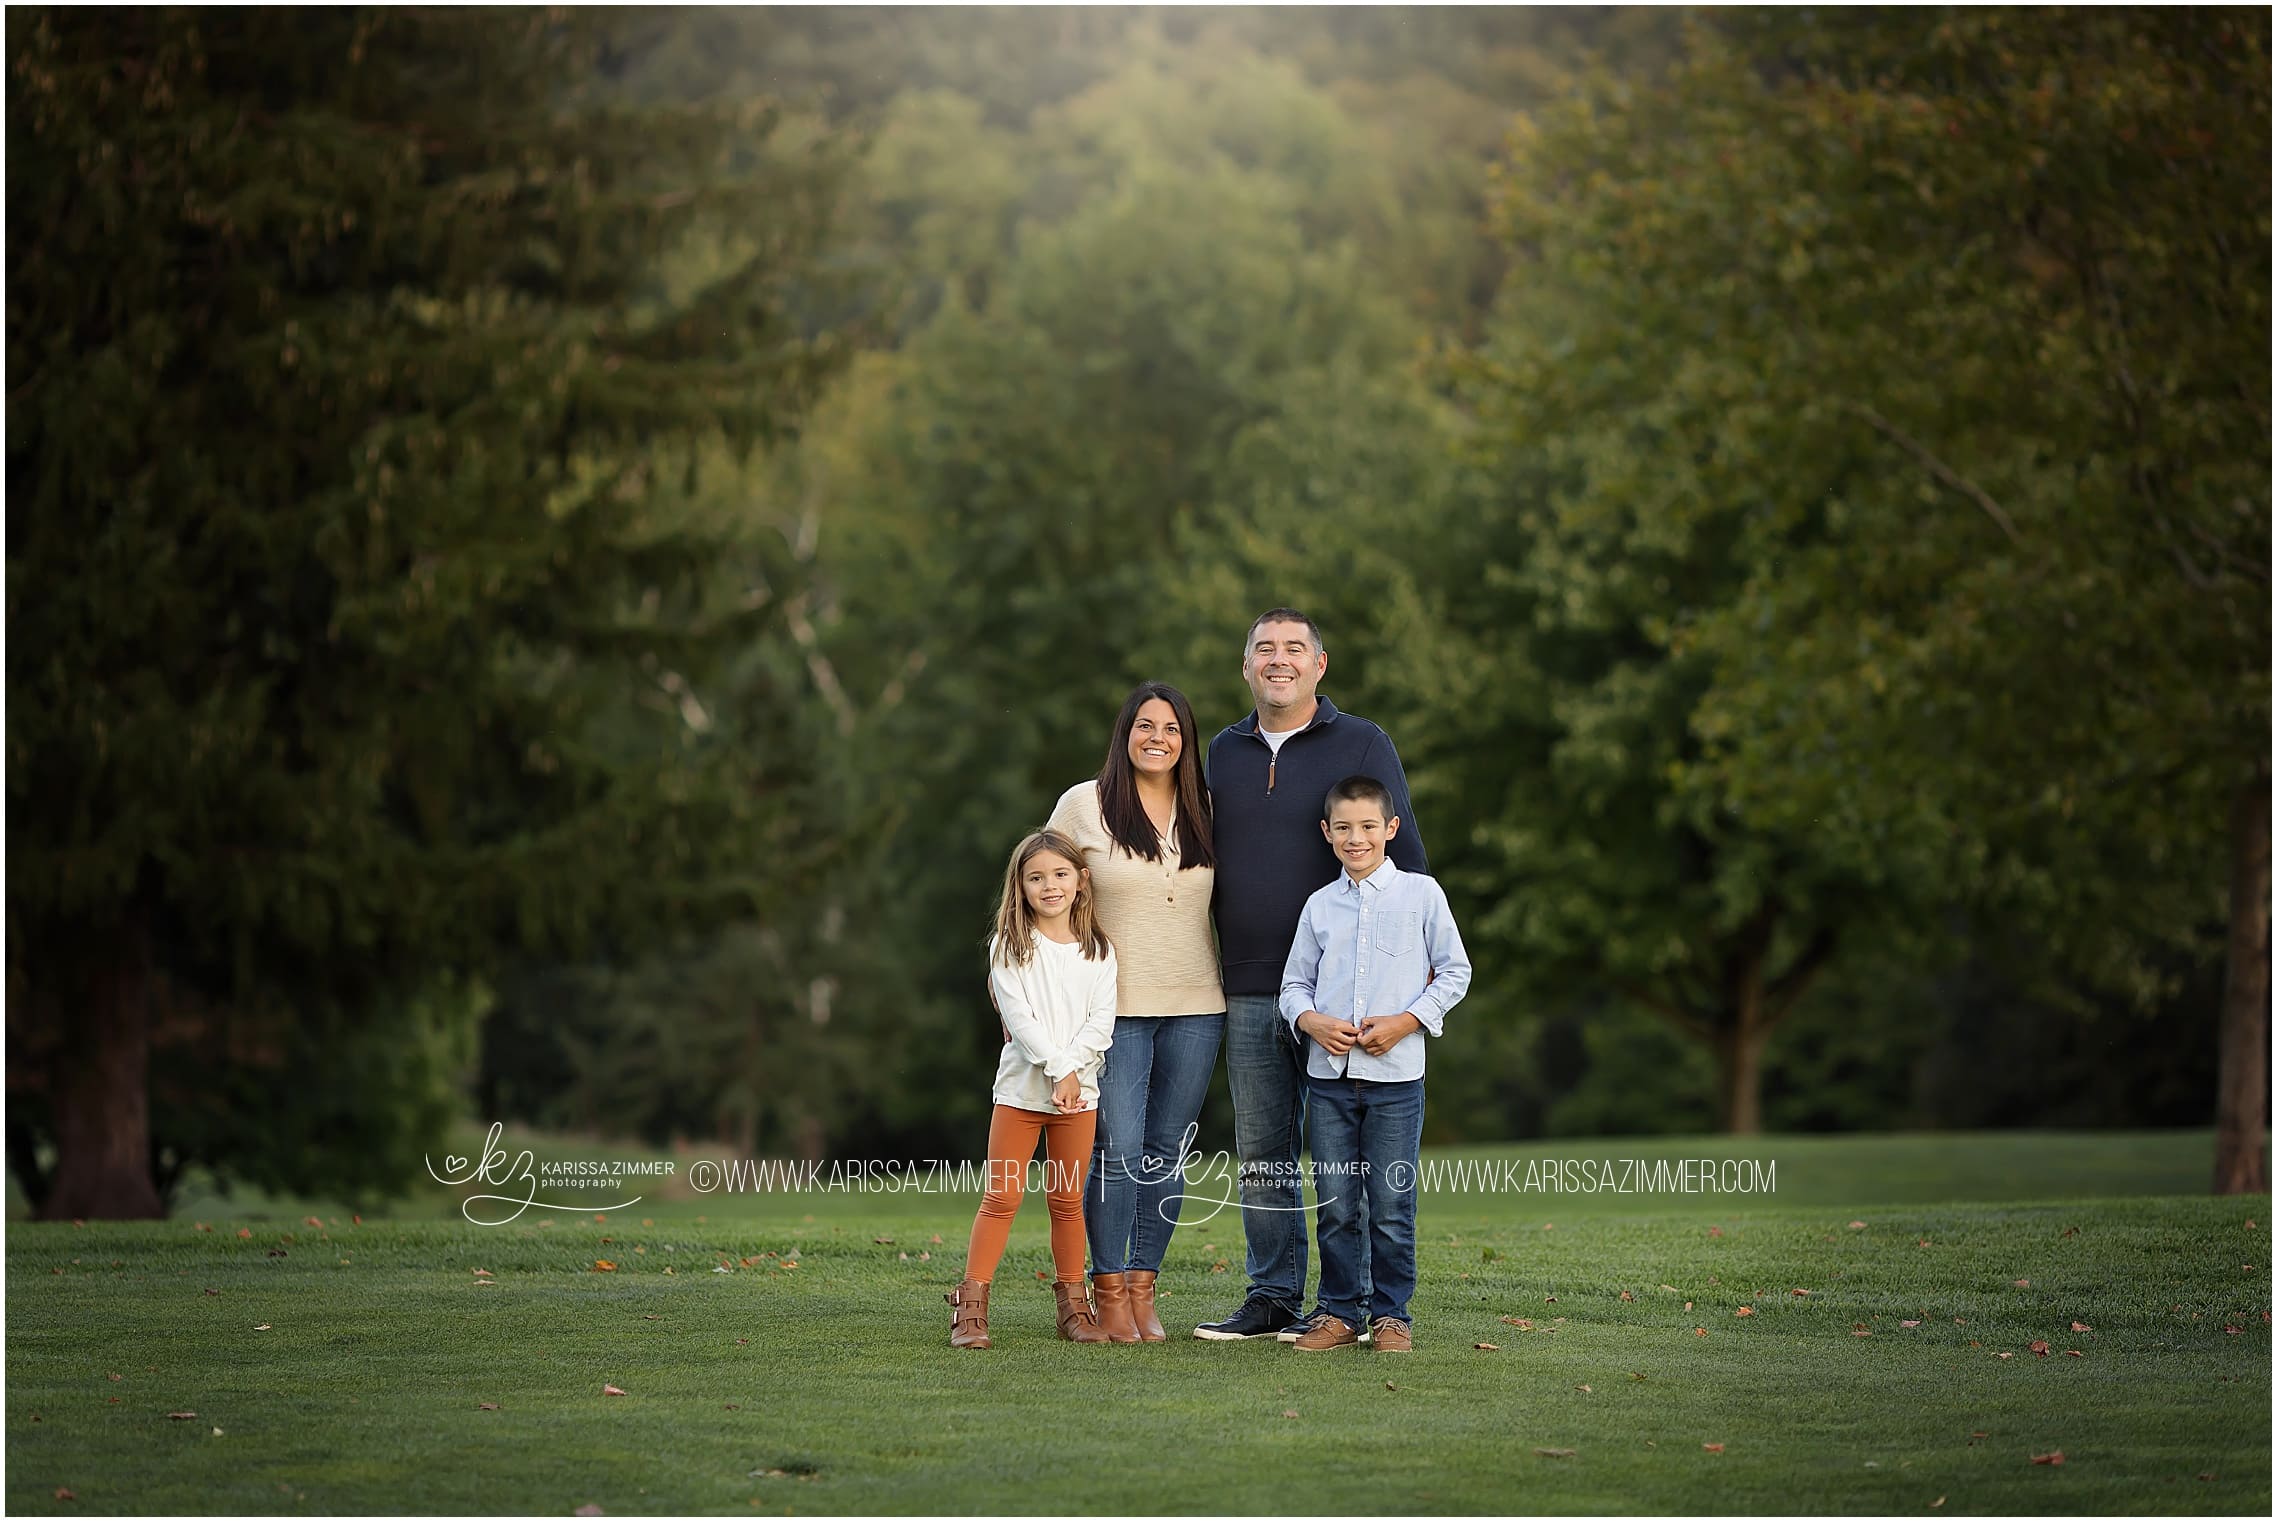 Family poses together at their outdoor fall family photography session near Harrisburg PA